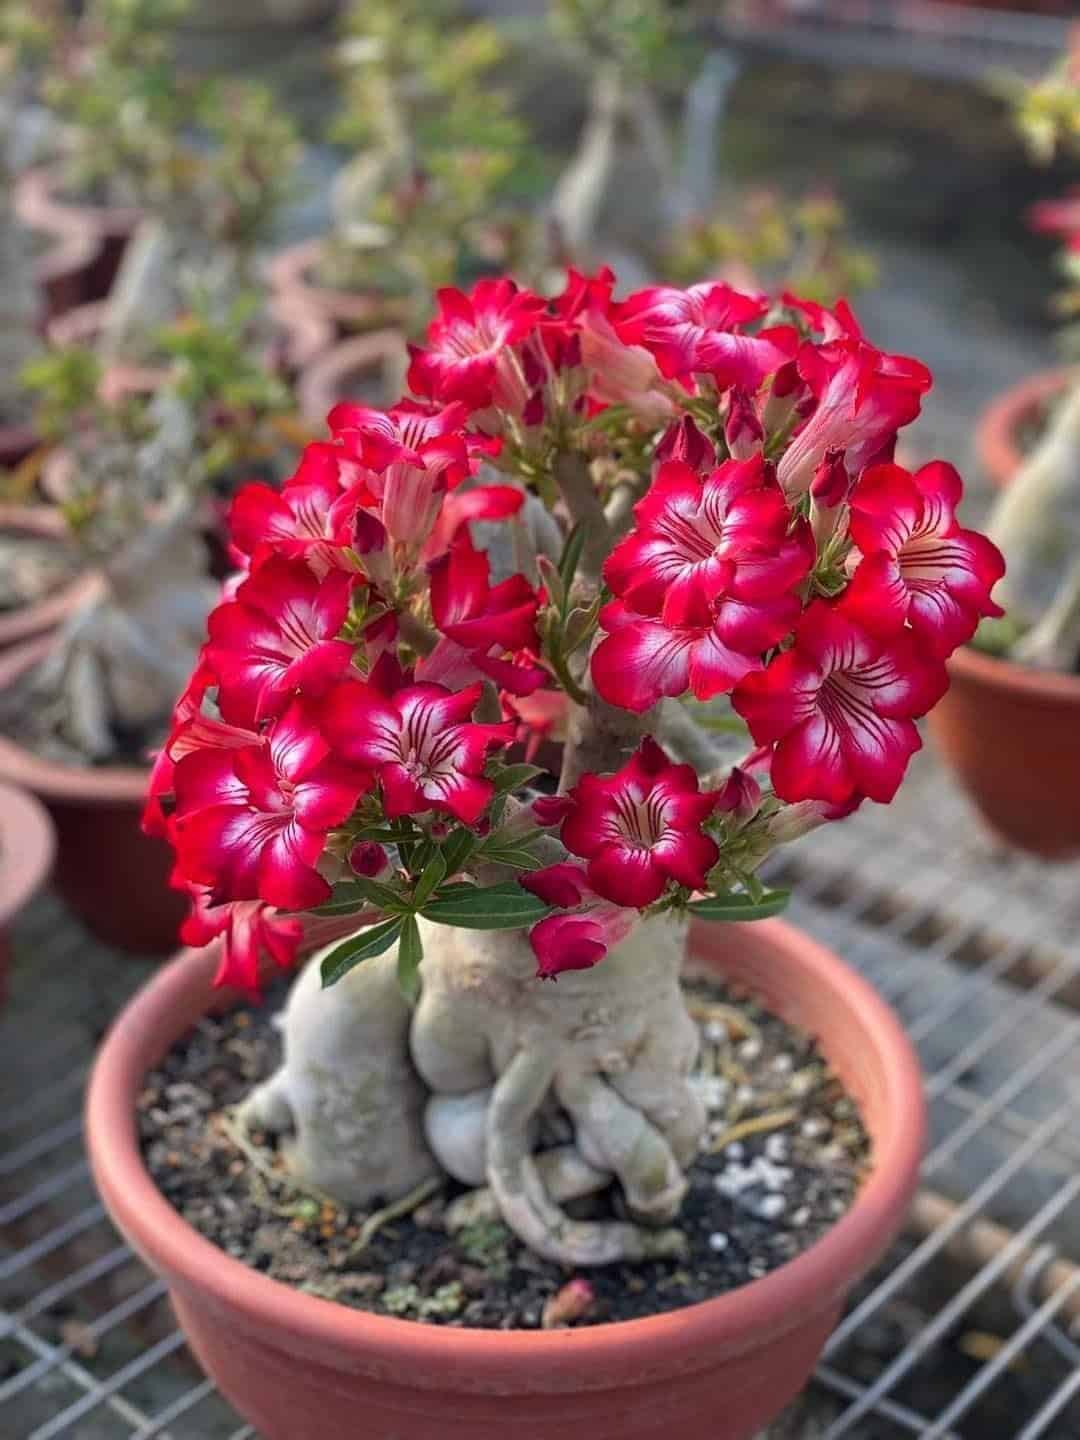 How To Grow And Care For Adenium Succulent?